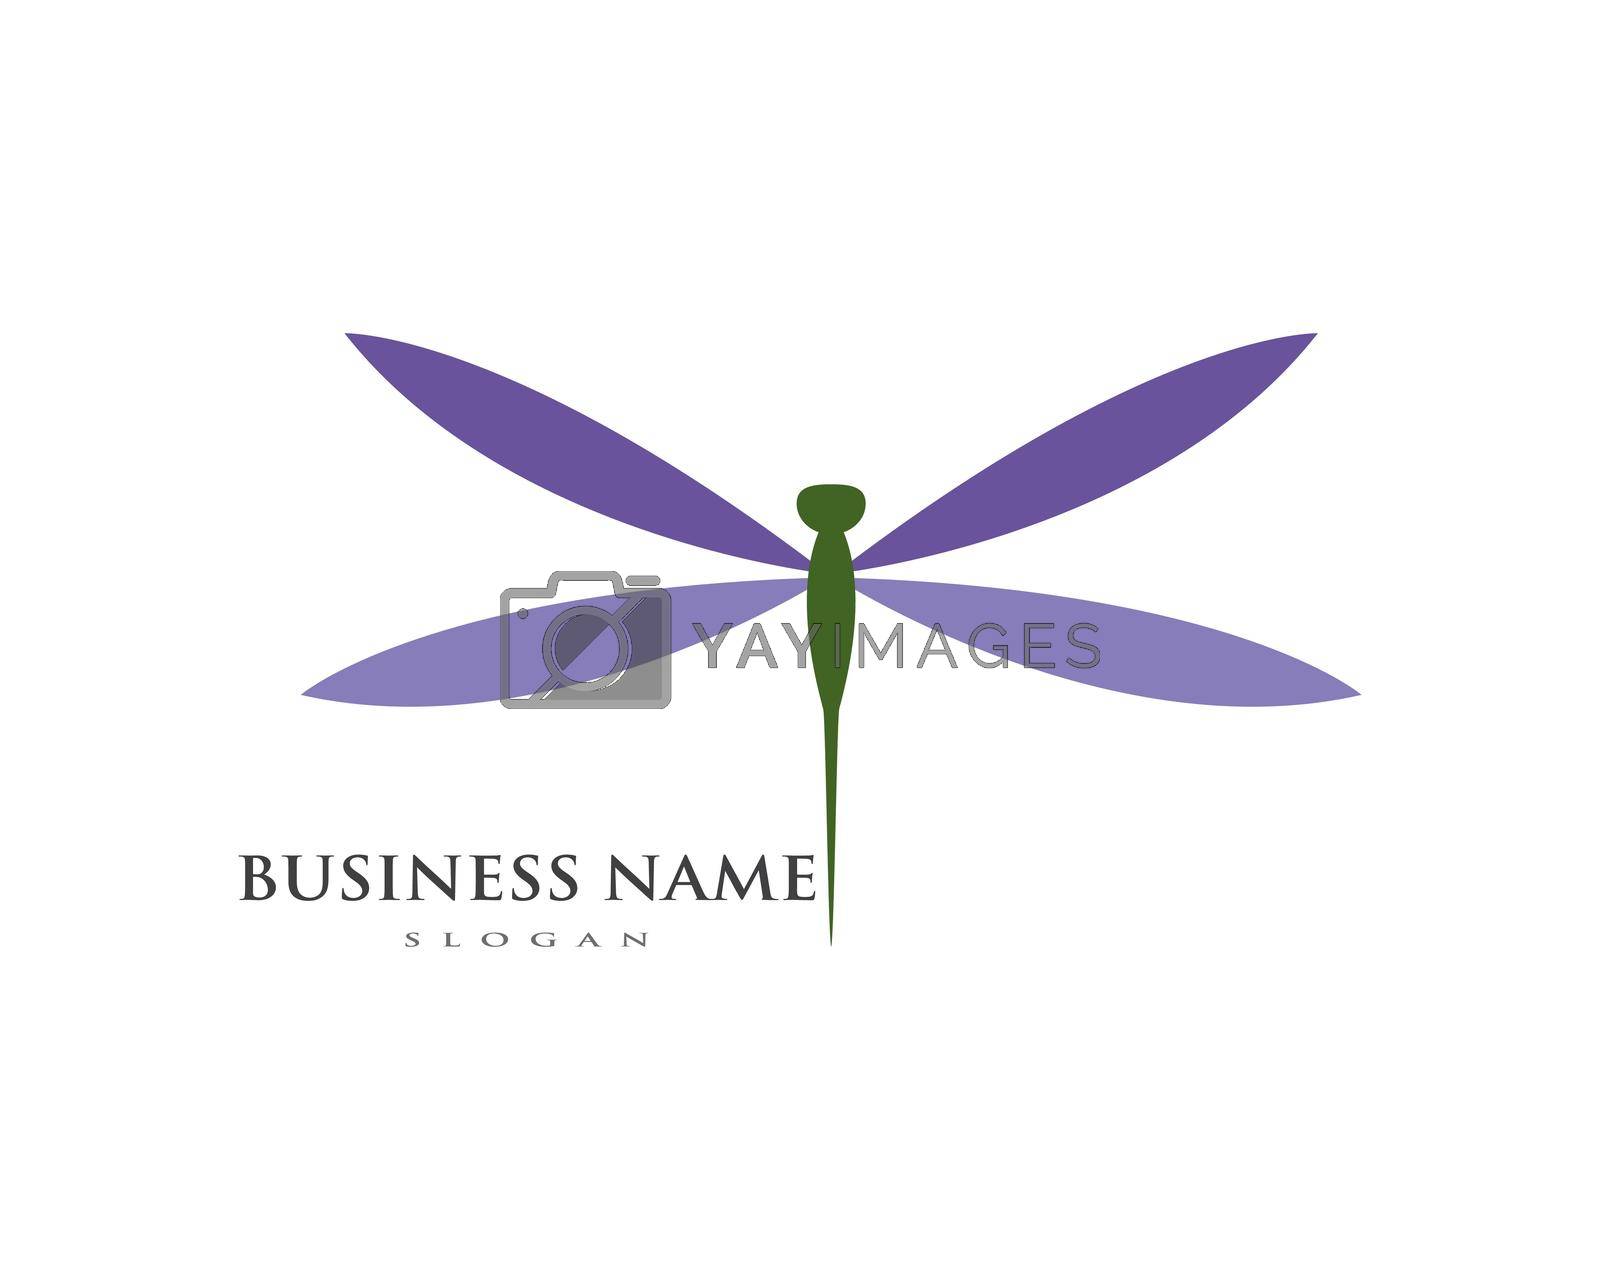 Royalty free image of dragon fly logo by awk